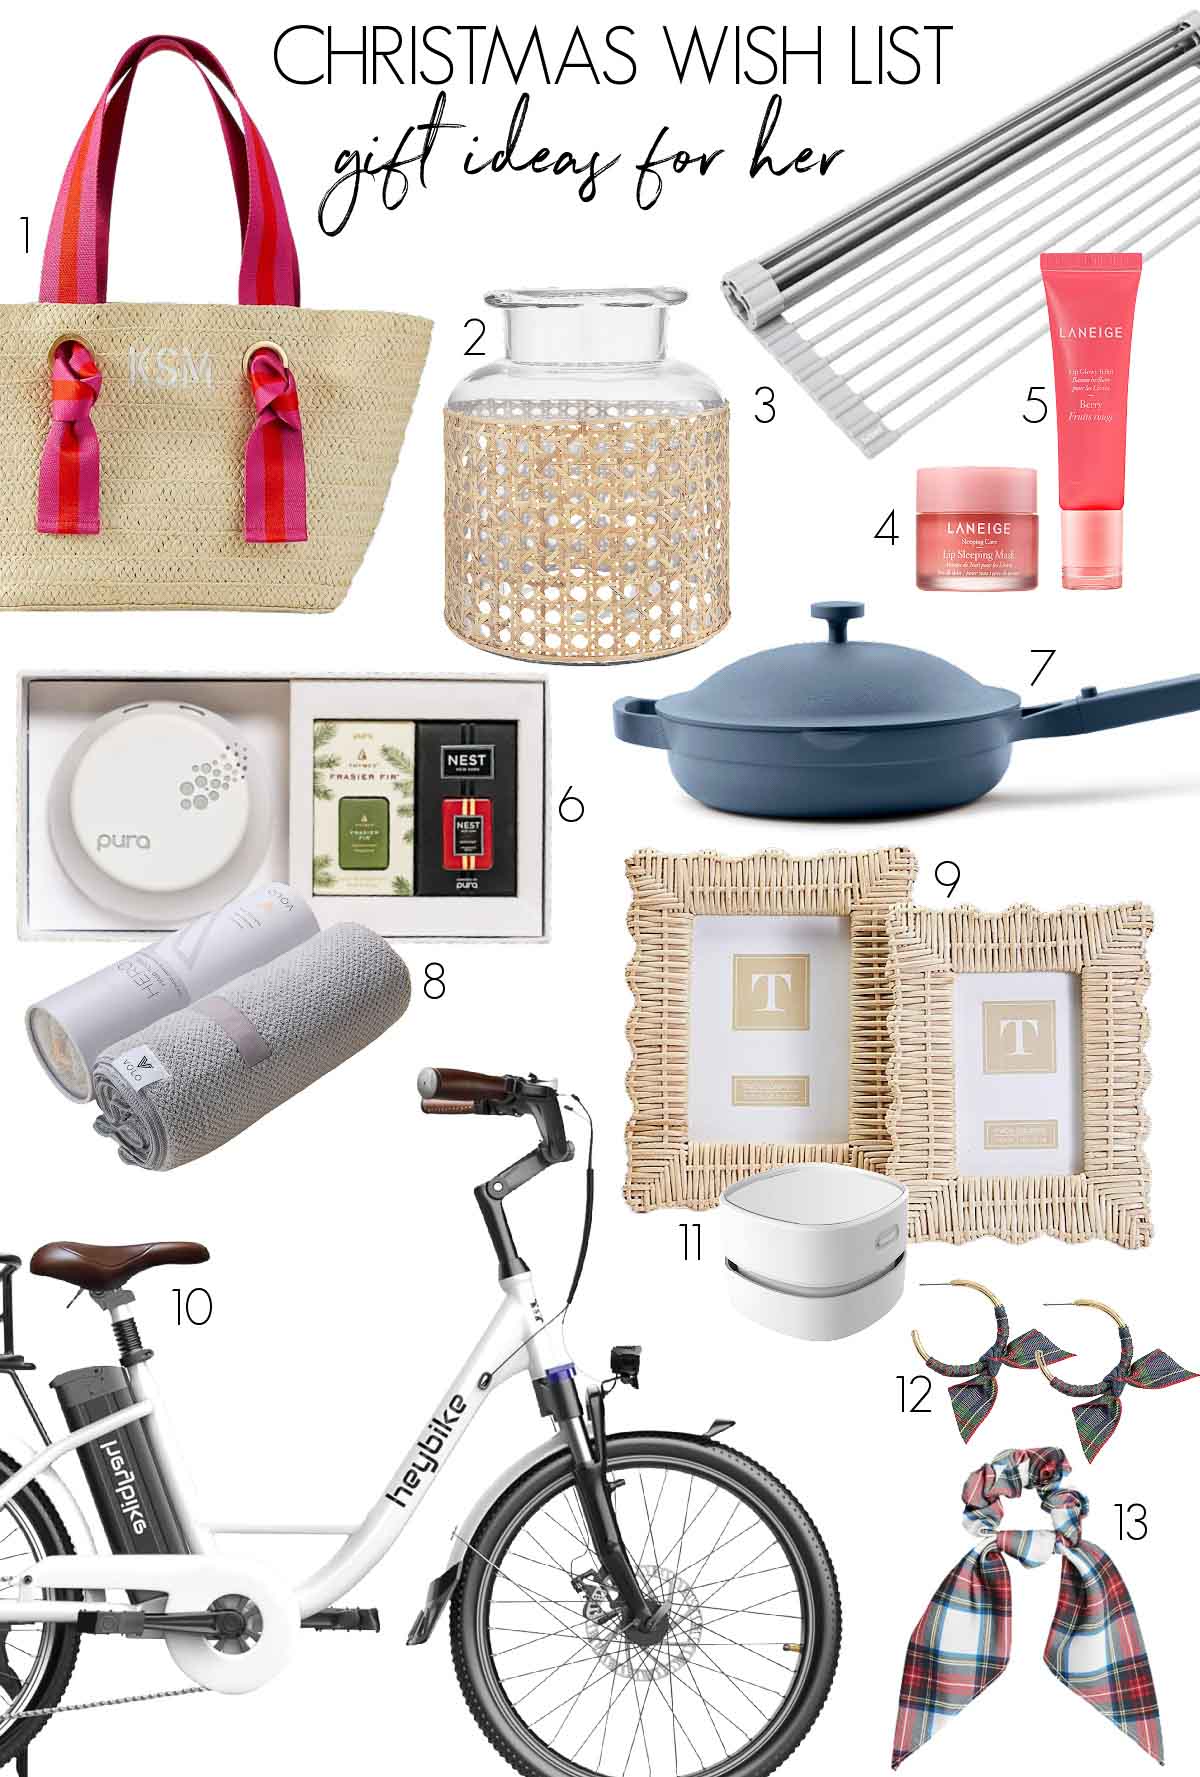 Making Your House Smart: What to Put on Your Christmas List